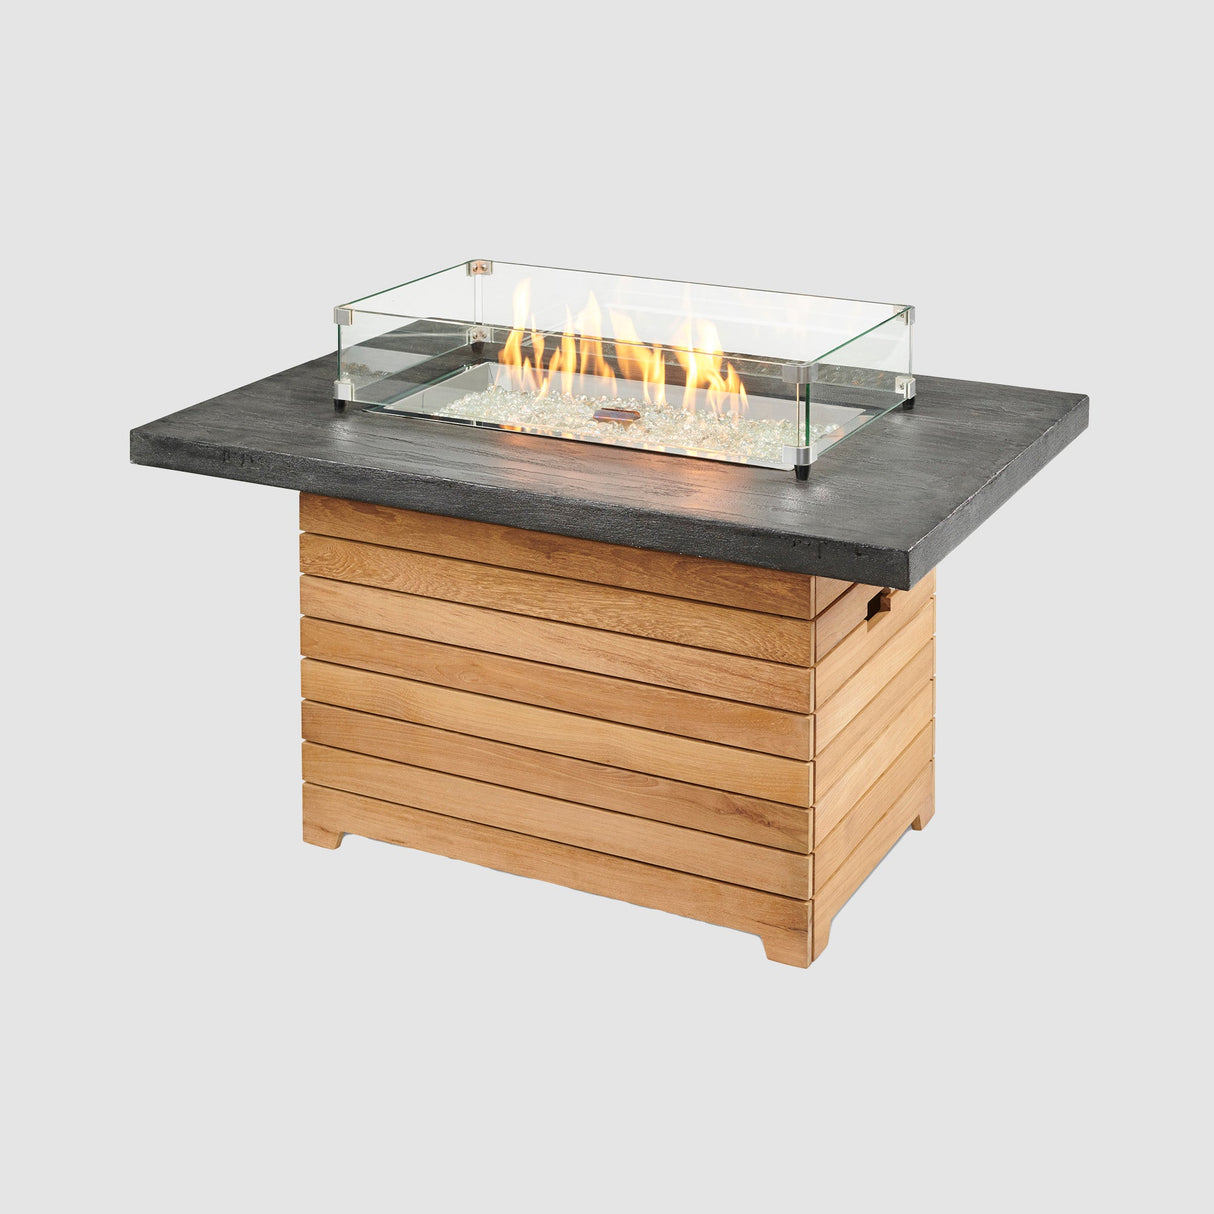 A glass wind guard placed on the top of a Darien Rectangular Gas Fire Pit Table with an Everblend top